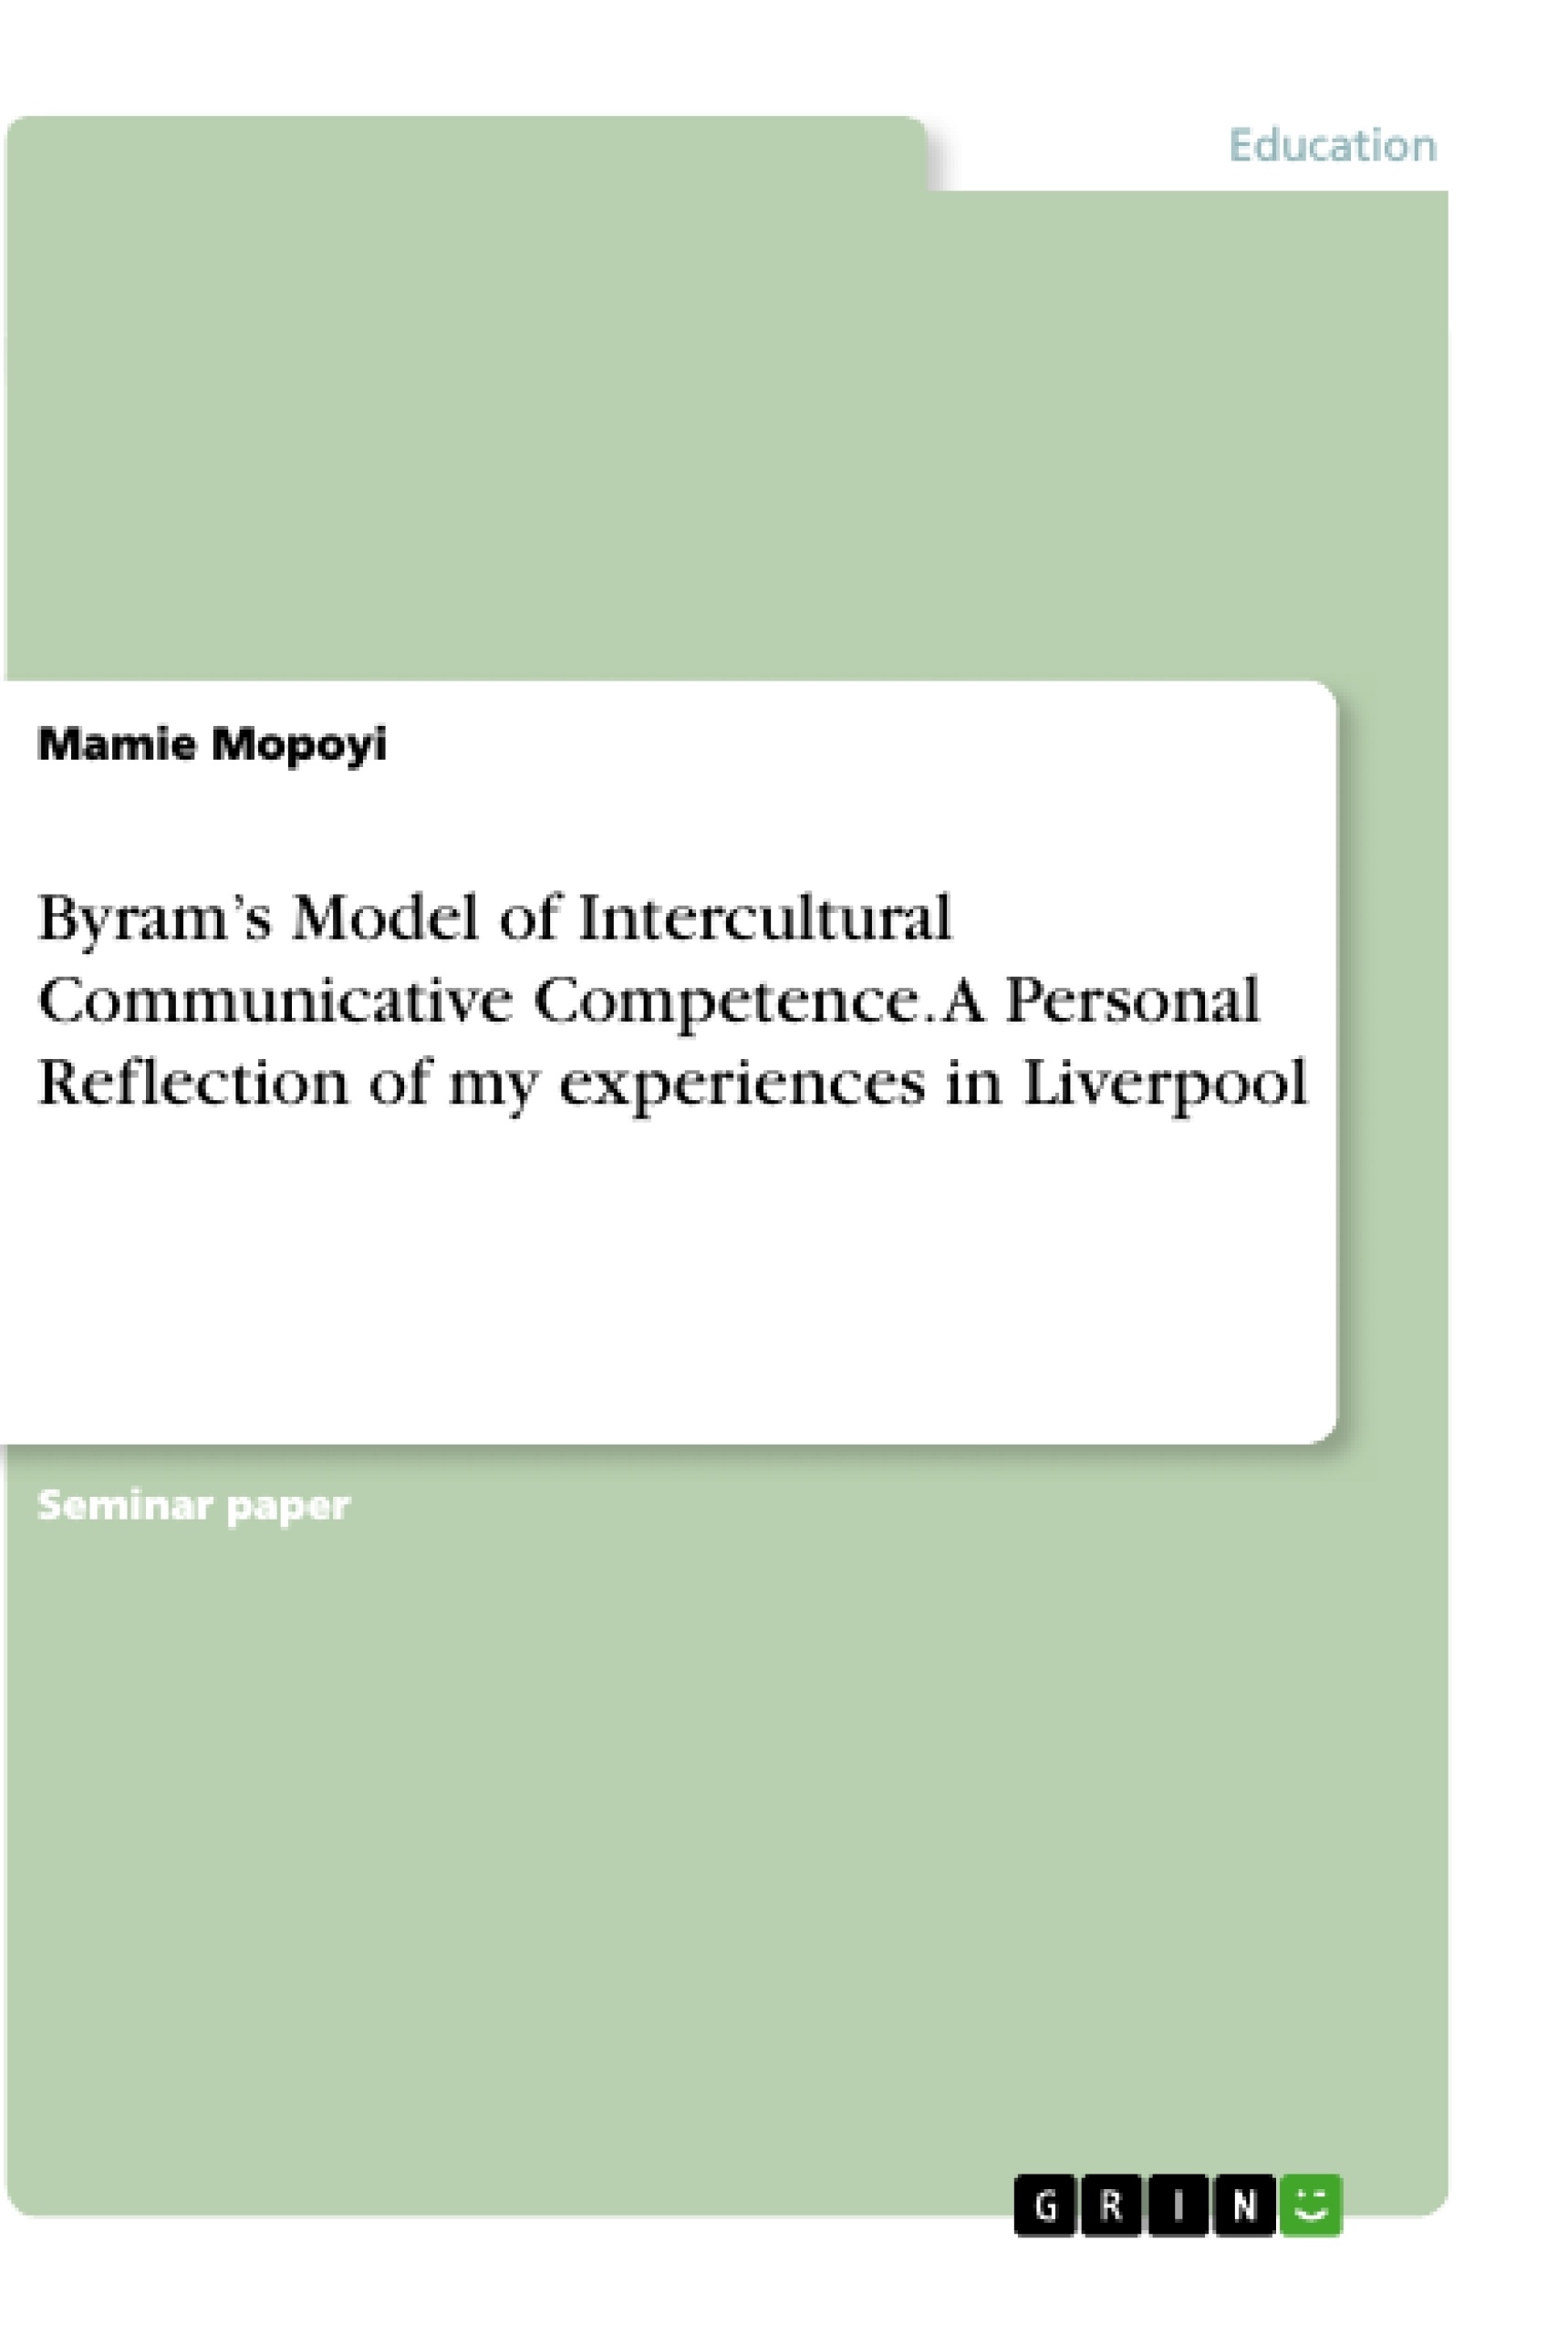 Title: Byram’s Model of Intercultural Communicative Competence. A Personal Reflection of my experiences in Liverpool